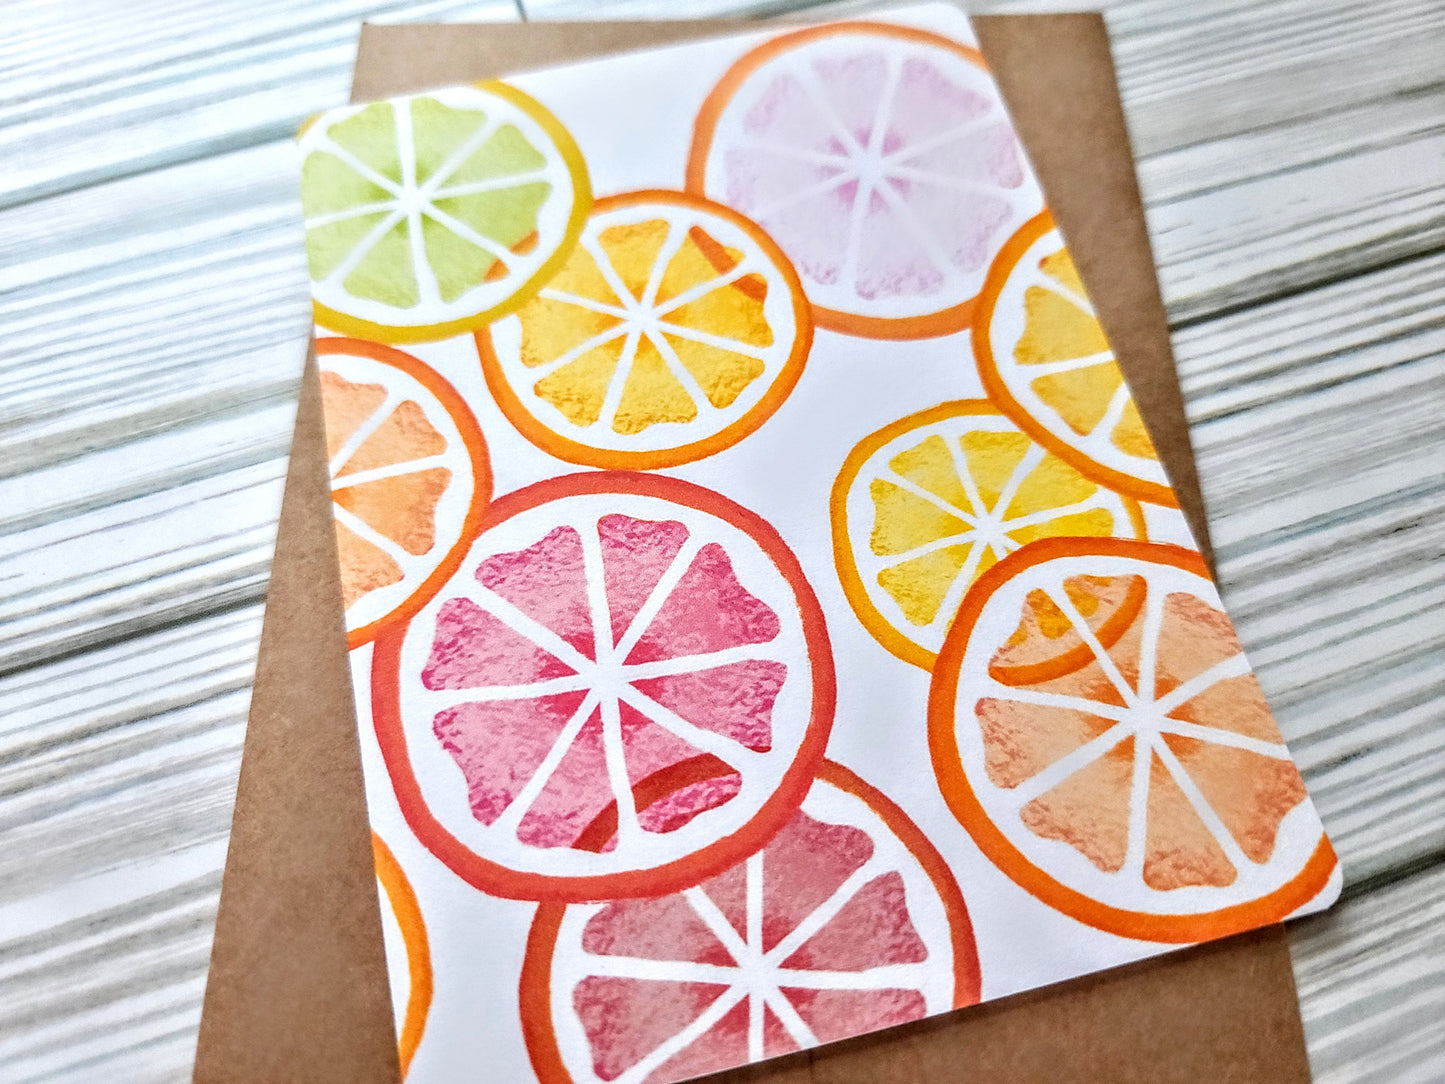 Citrus Slices Handmade Greeting Card - Recycled Paper and Kraft Envelope - Angled Overhead Shot